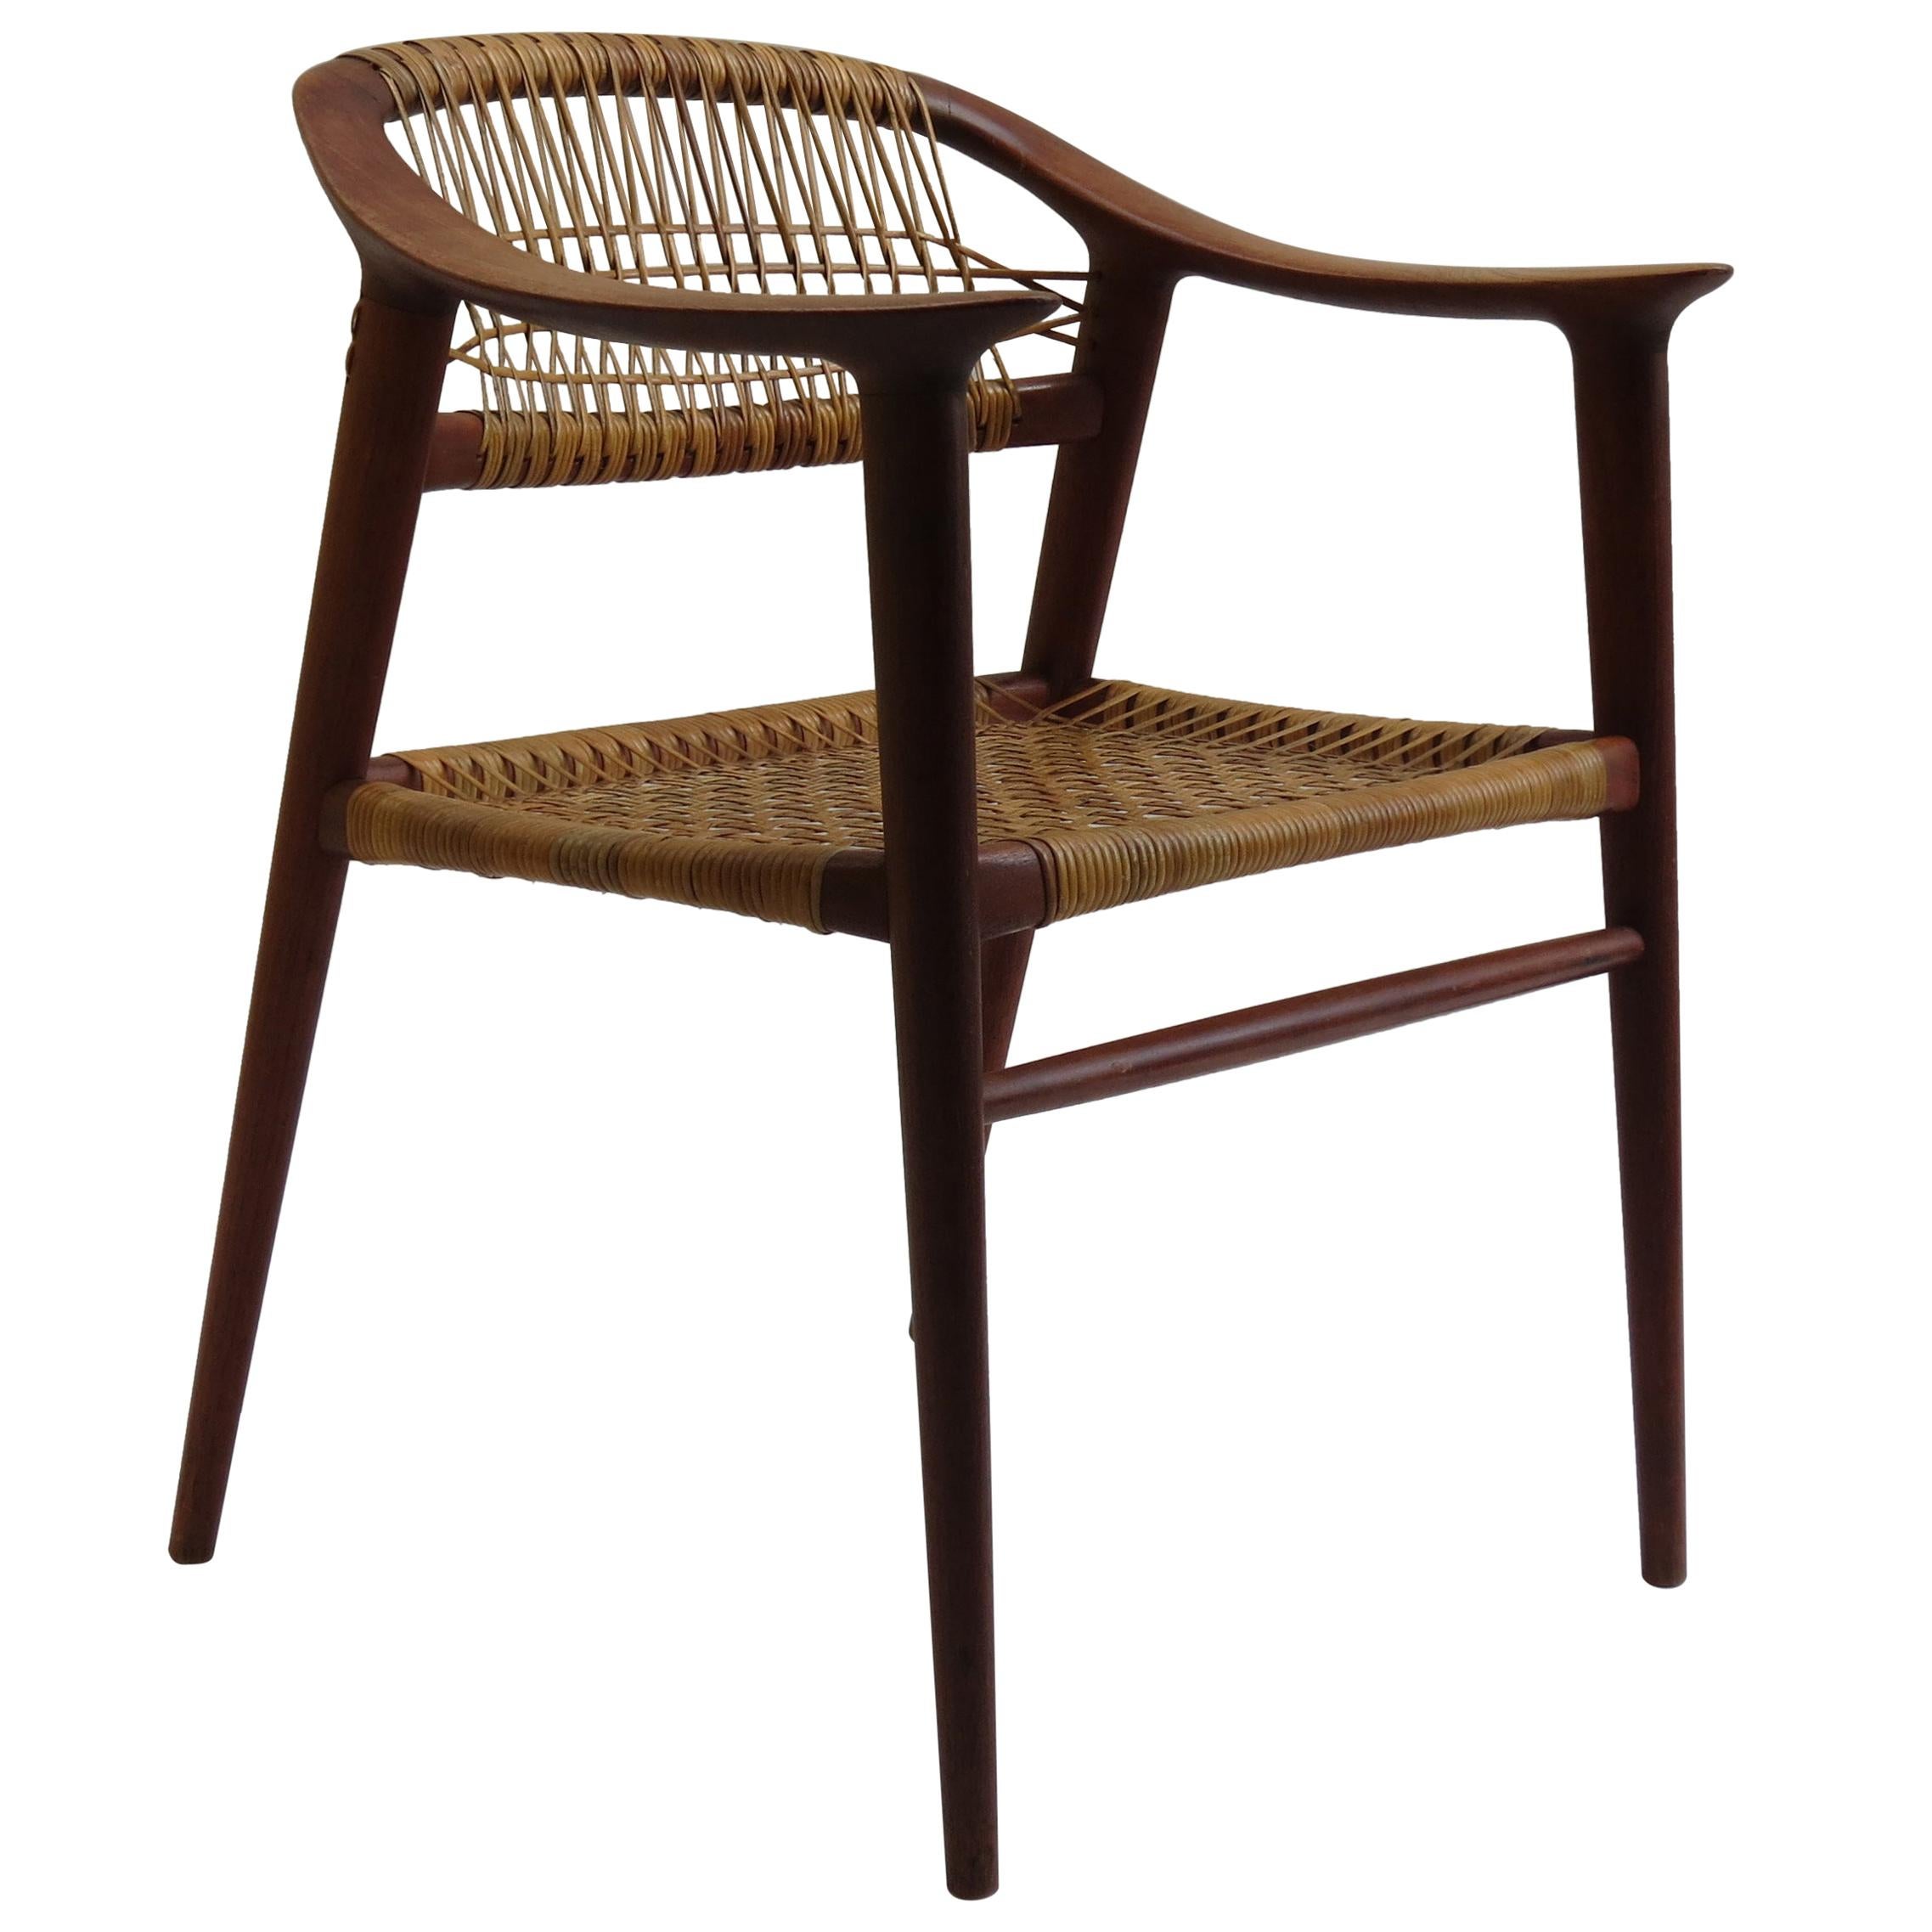 1950s Bambi Teak and Cane Dining Chair by Rolf Rastad and Adolf Relling Norway